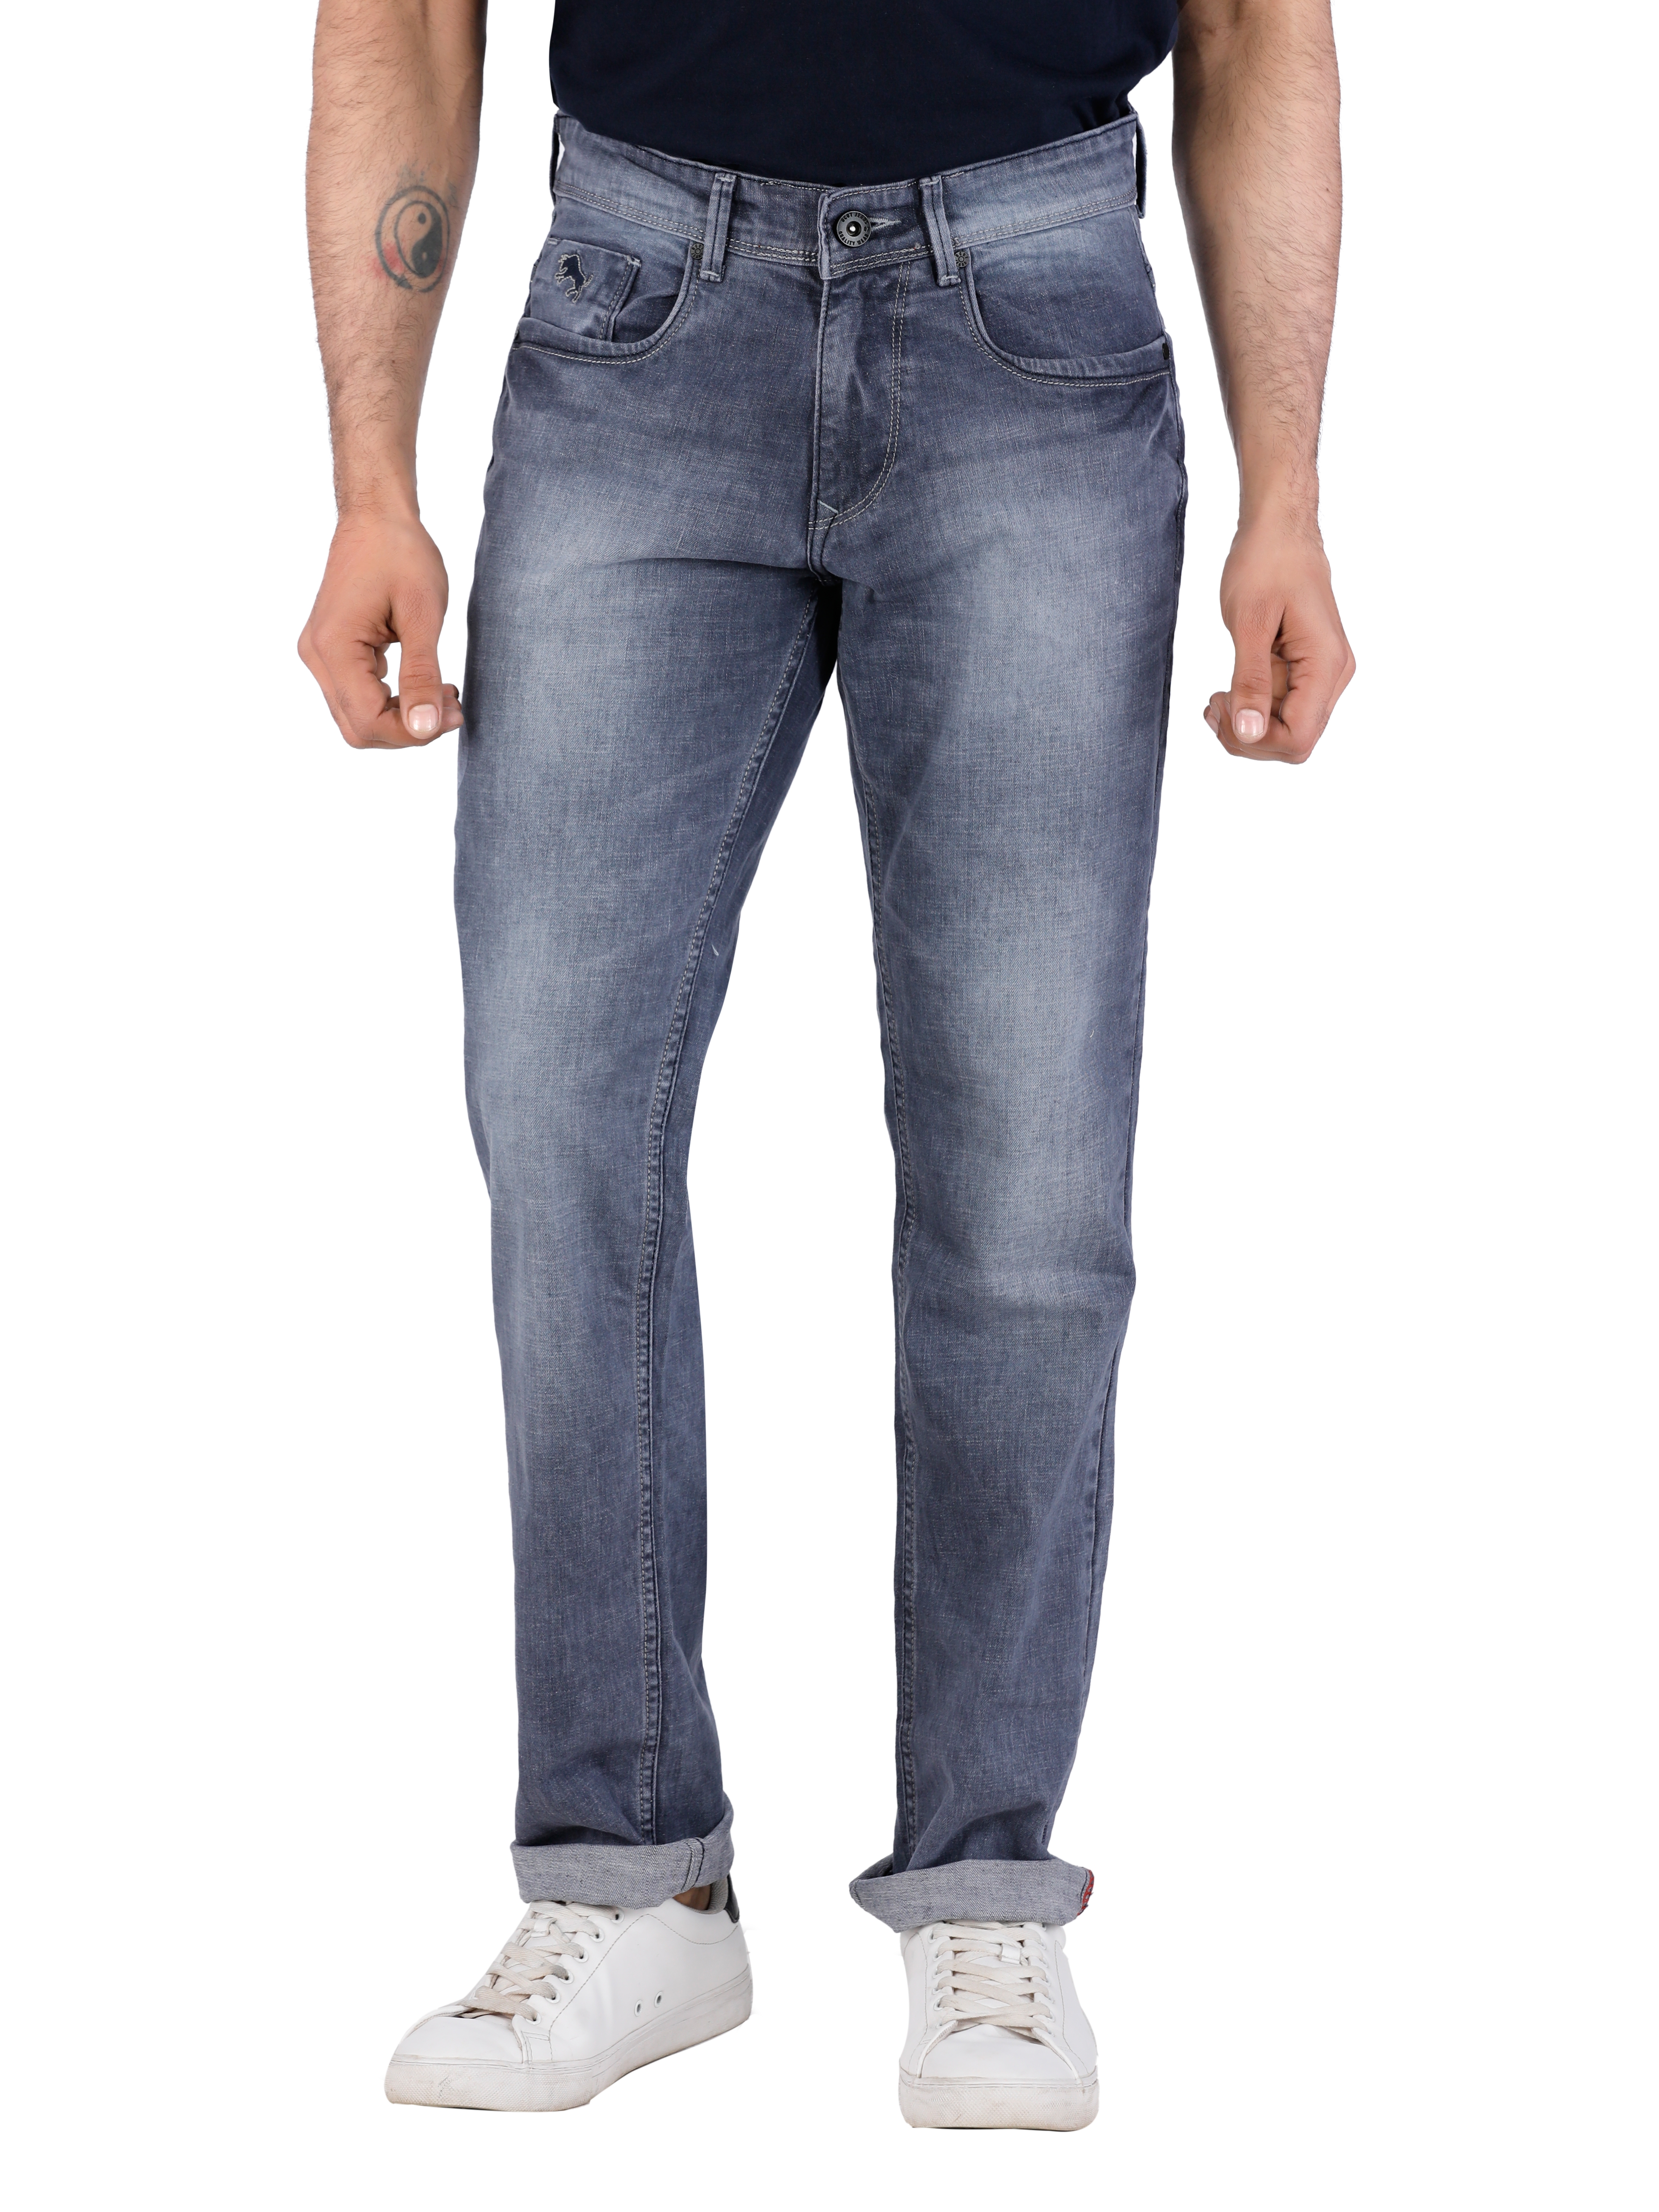 D'cot by Donear | D'cot by Donear Men Grey Cotton Tapered Solid Jeans